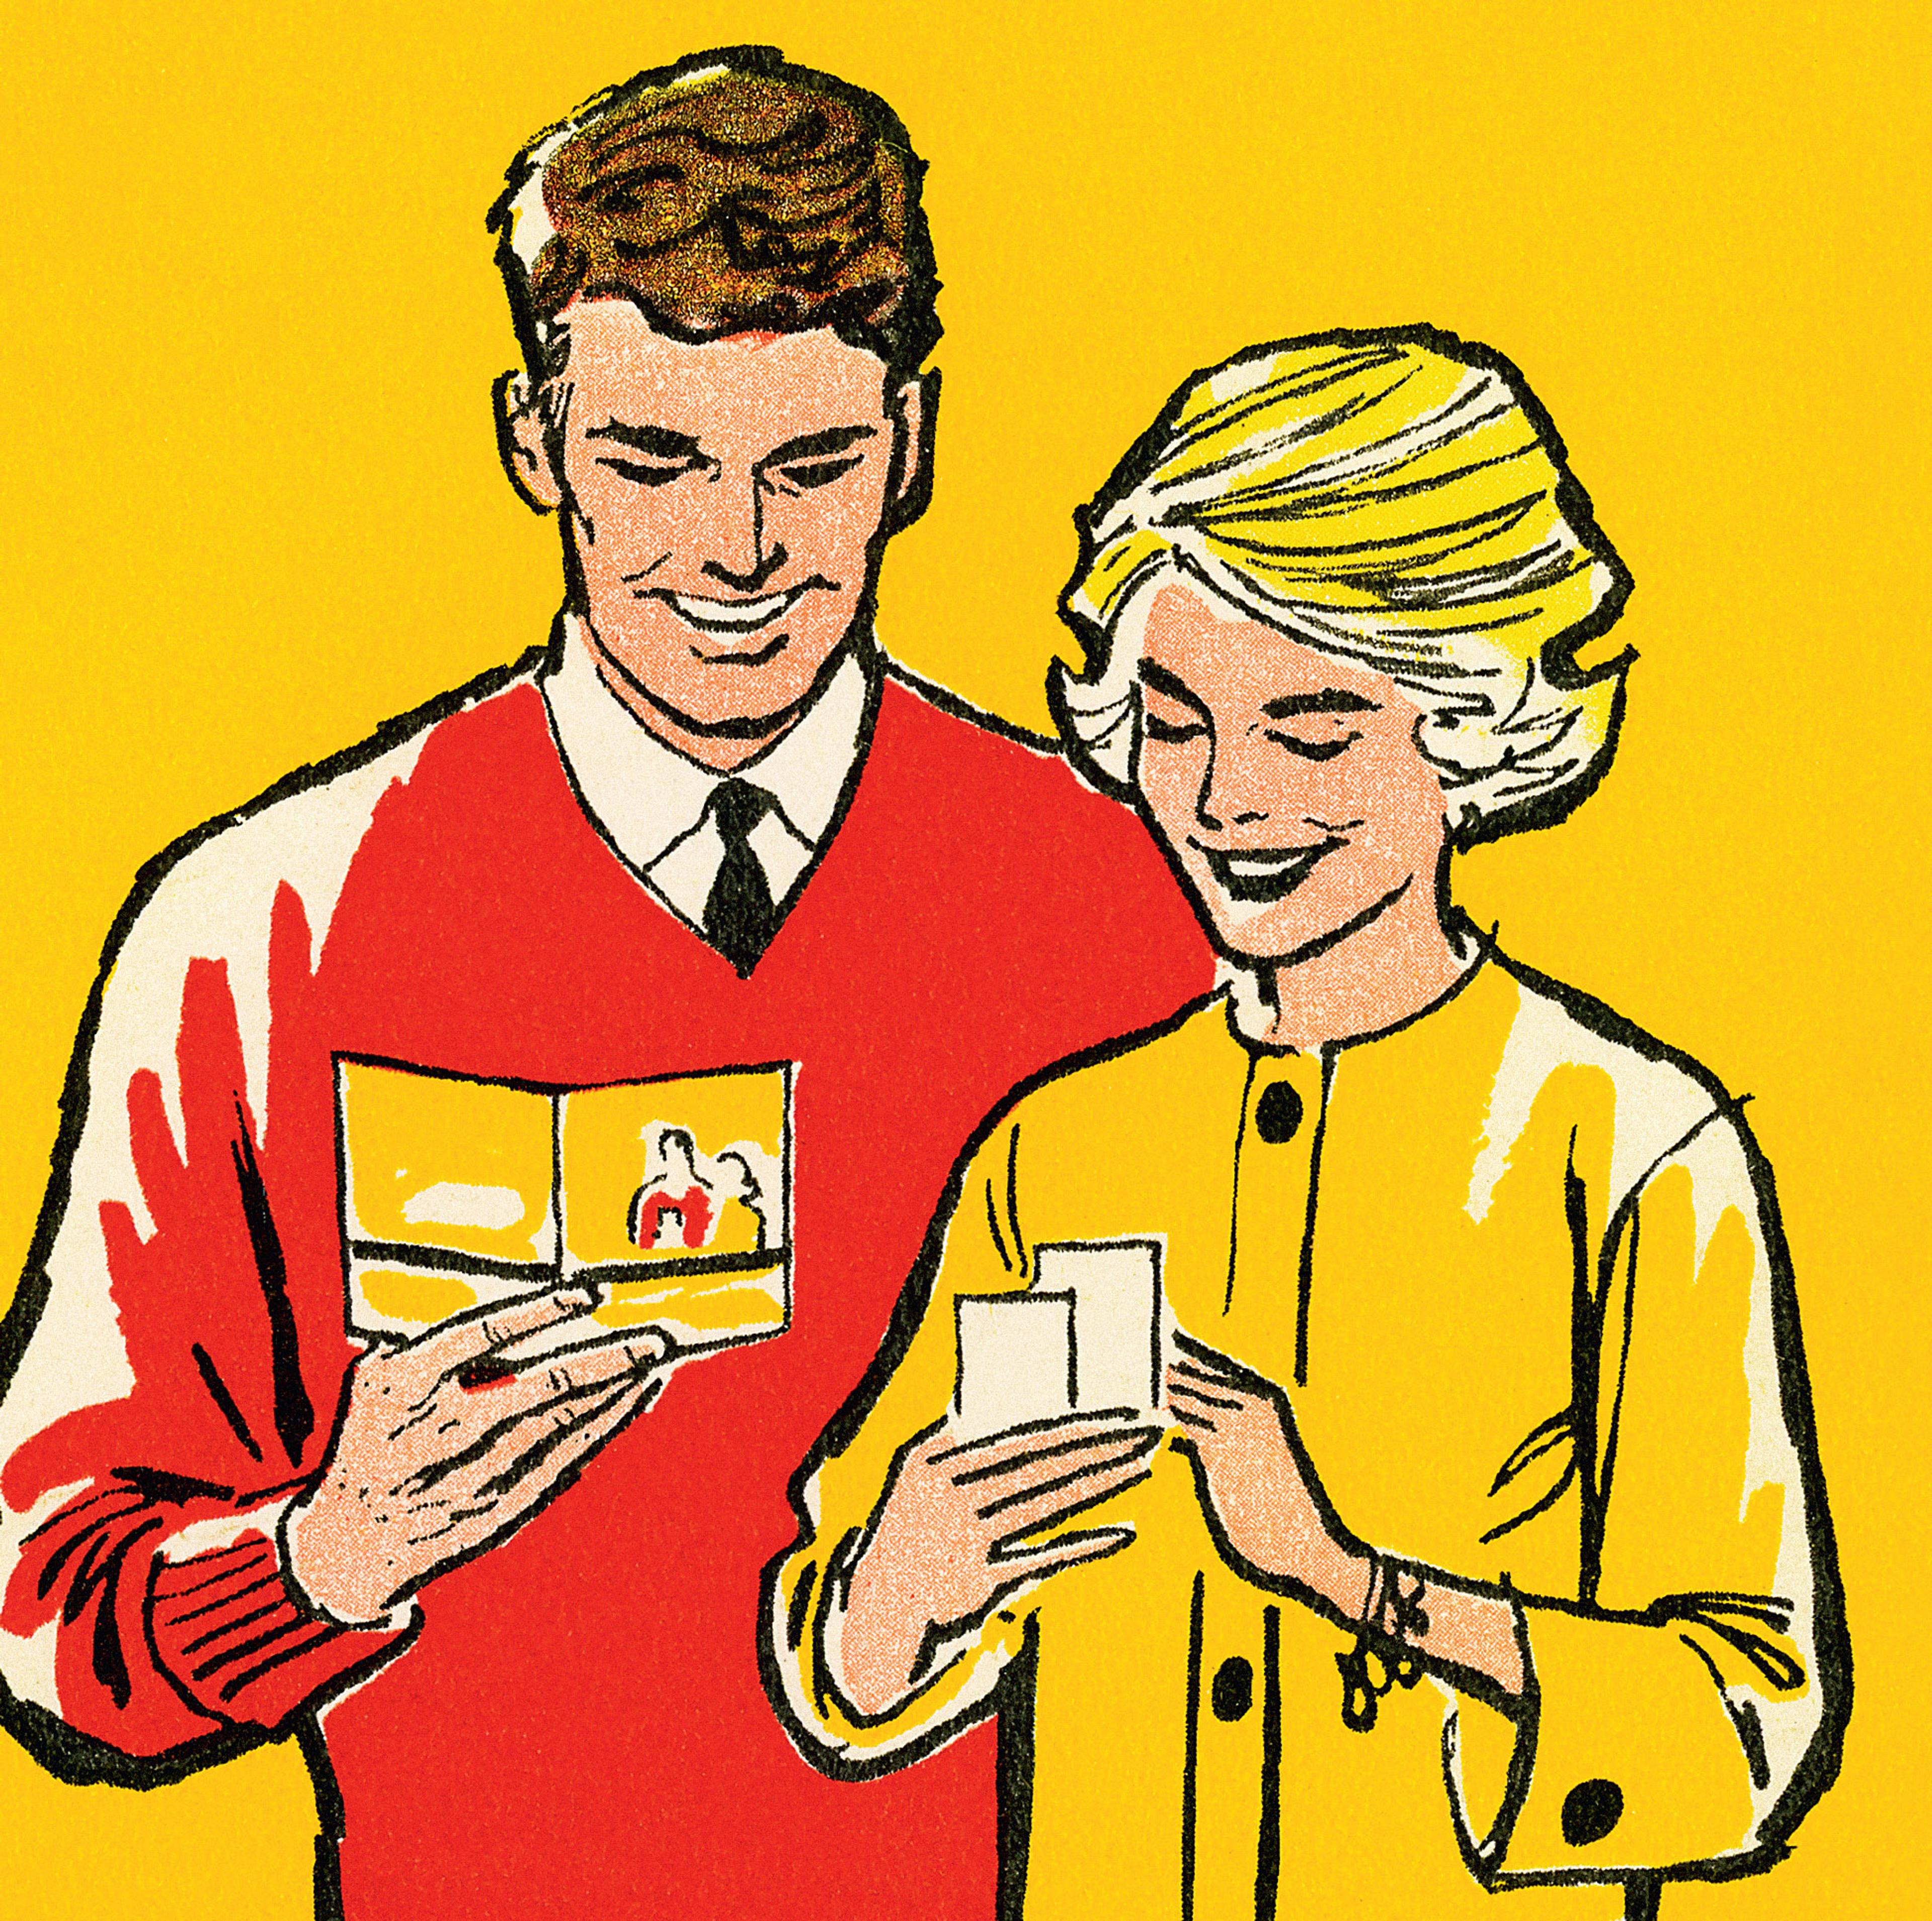 Red and yellow illustration of two people looking at pieces of paper in their hands, both people smiling.